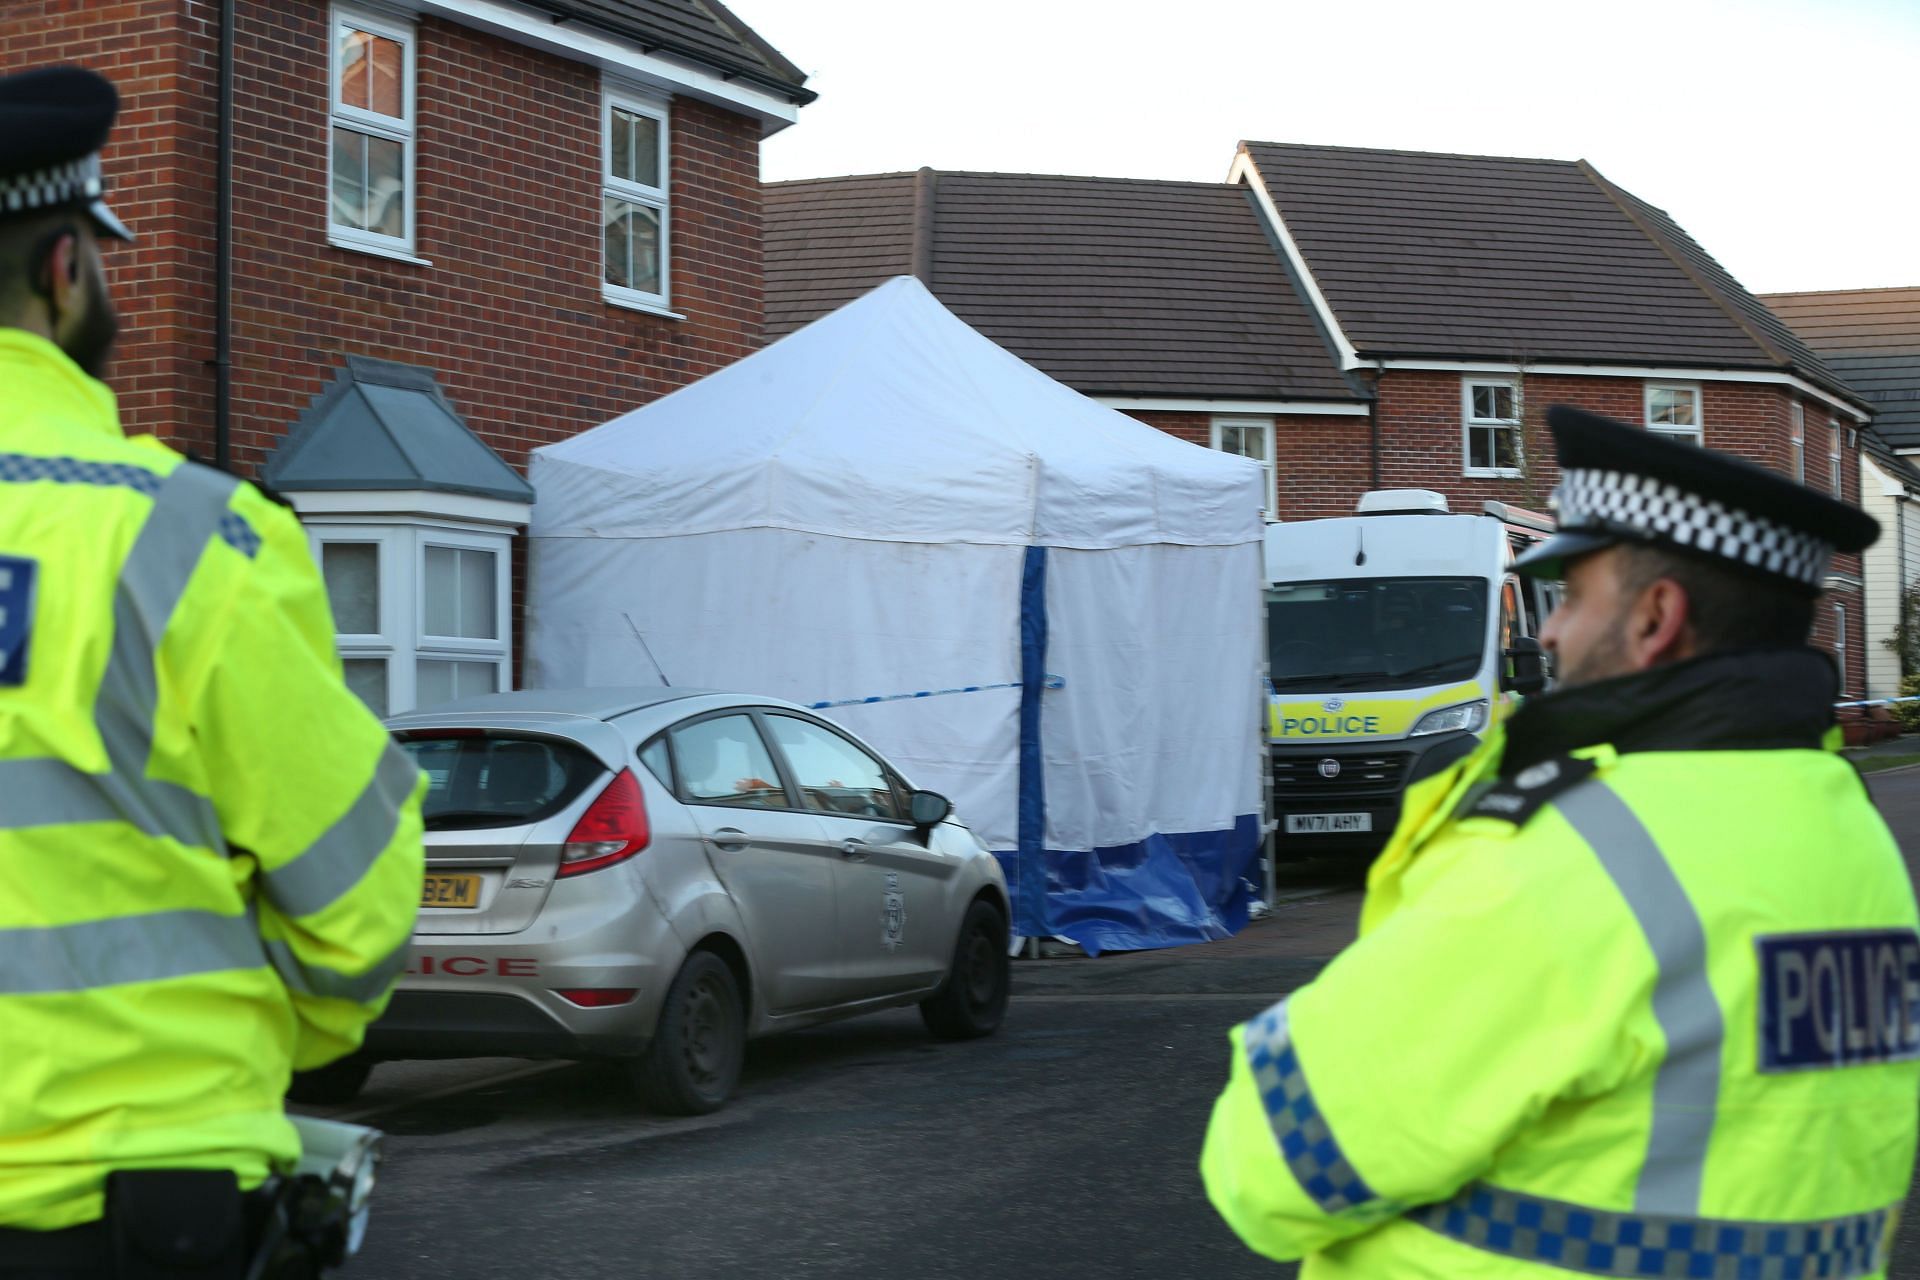 Four Bodies Found In House In Norwich (Image via Getty/@Martin Pope)